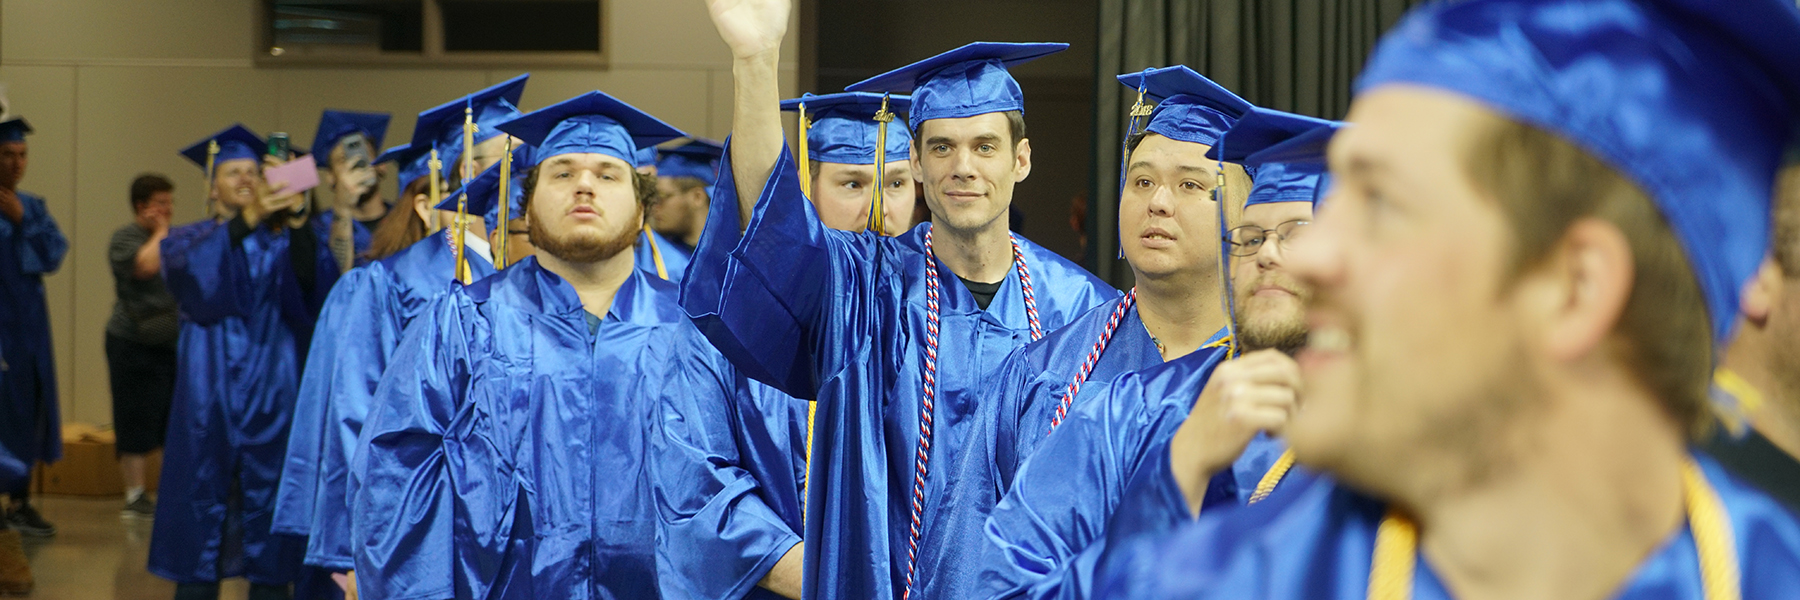 Students at Spokane Community College's 2018 graduation waving as they walk in to be seated